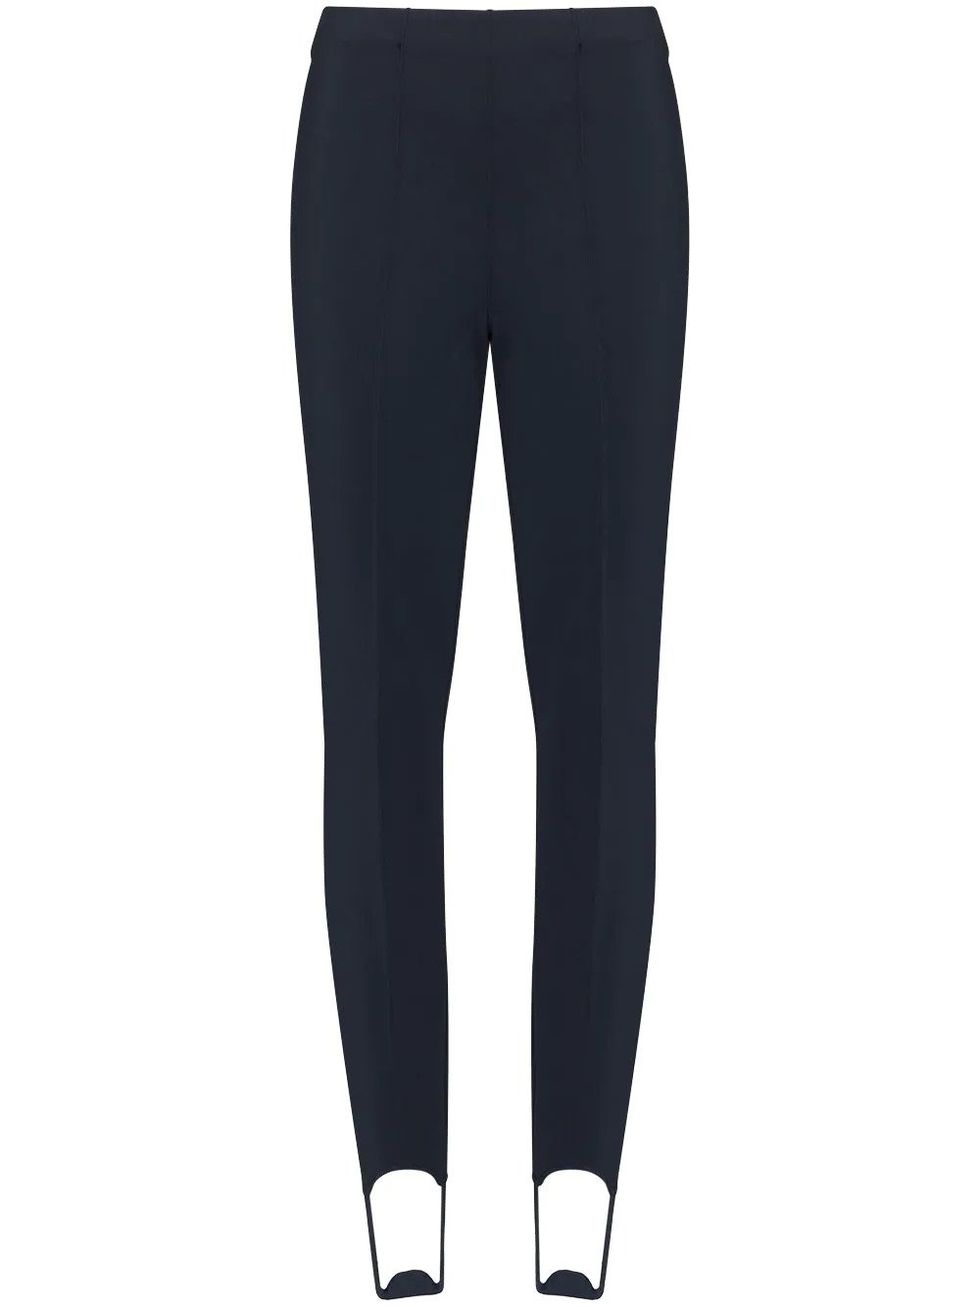 Ski Pant Leggings For Keeping Toasty Under Your Salopettes